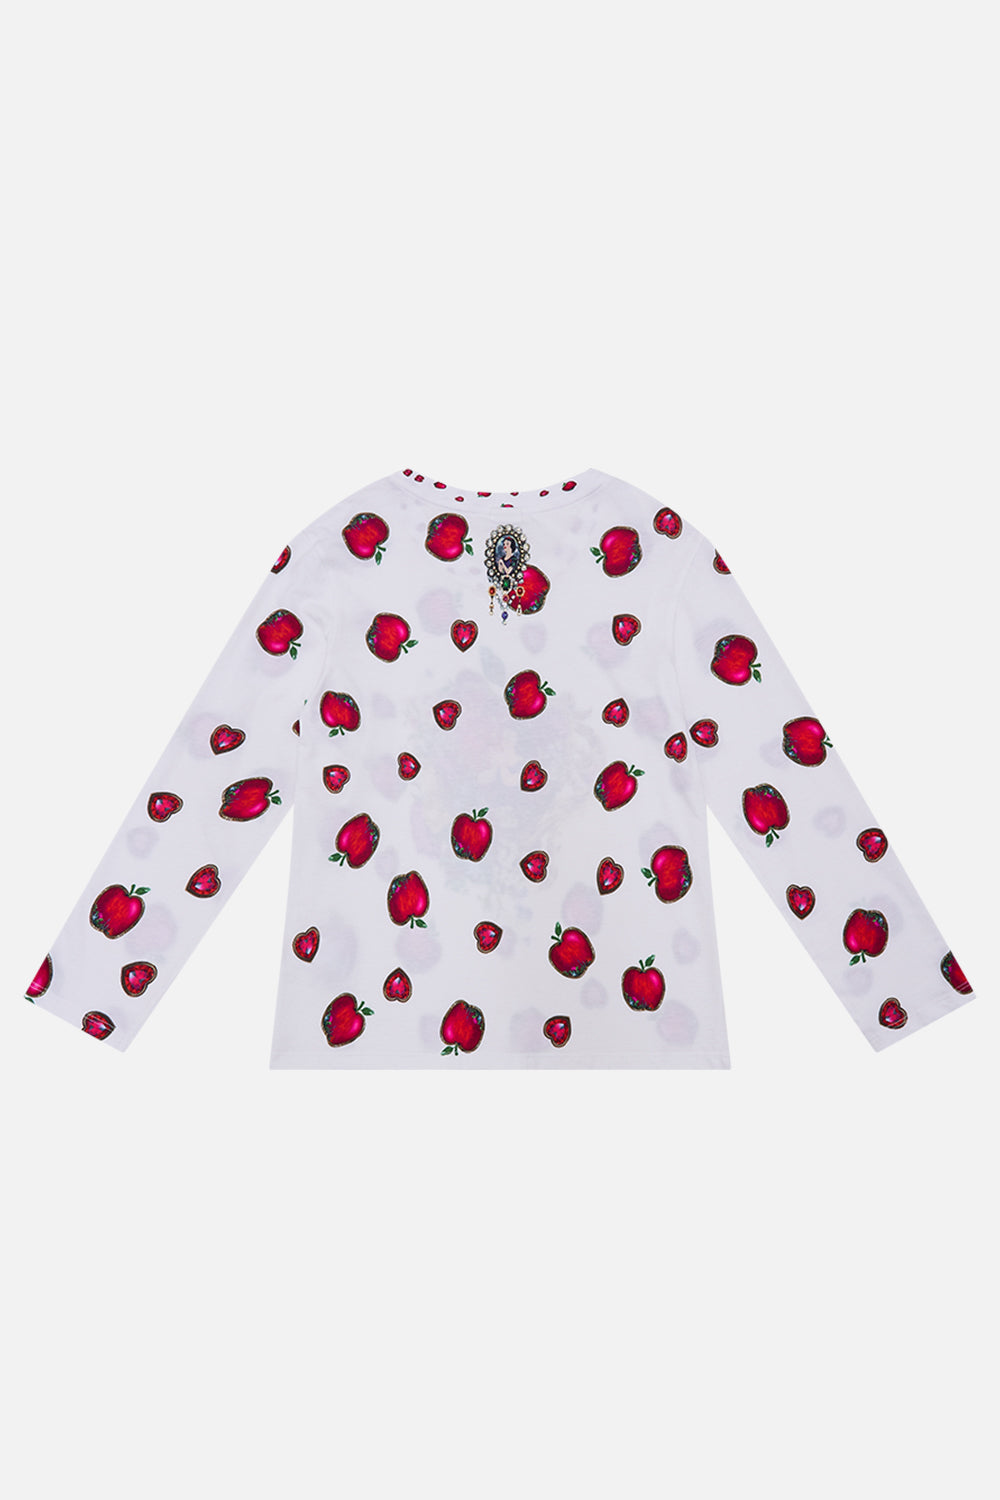 Disney CAMILLA kids long sleeve top in Just One Bite Snow White print